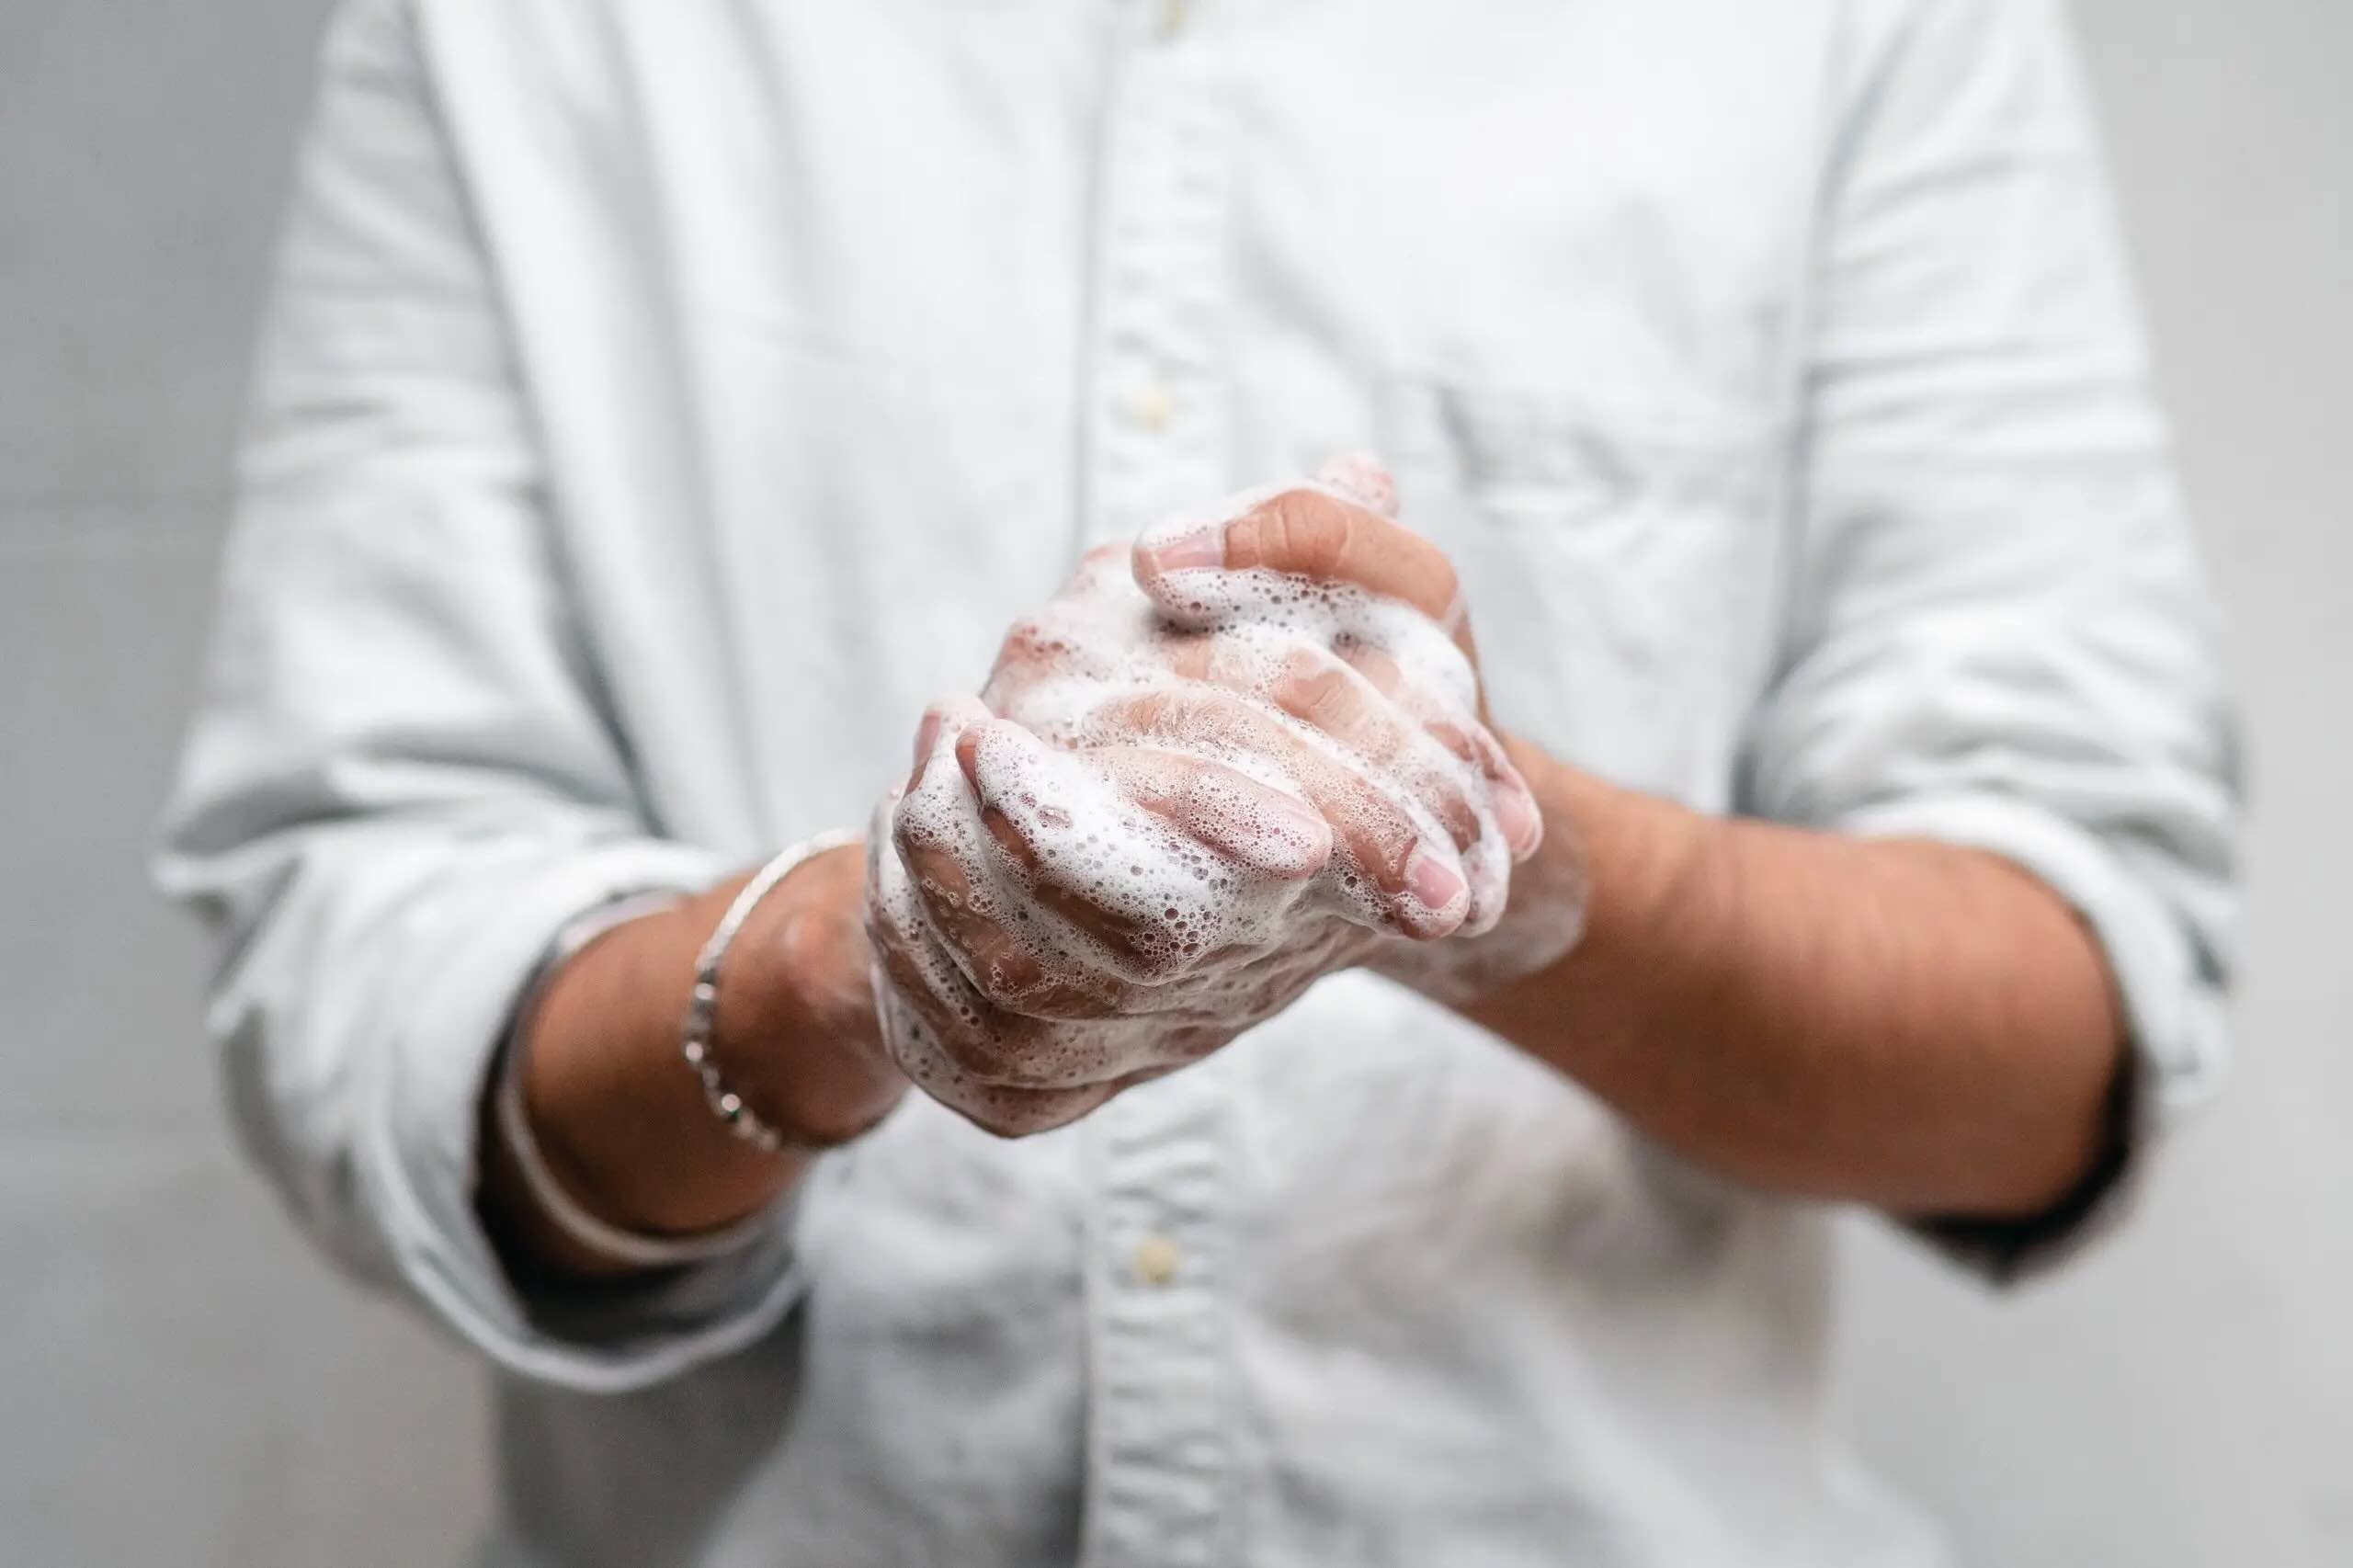 How To Clean Construction Adhesive Off Your Hands